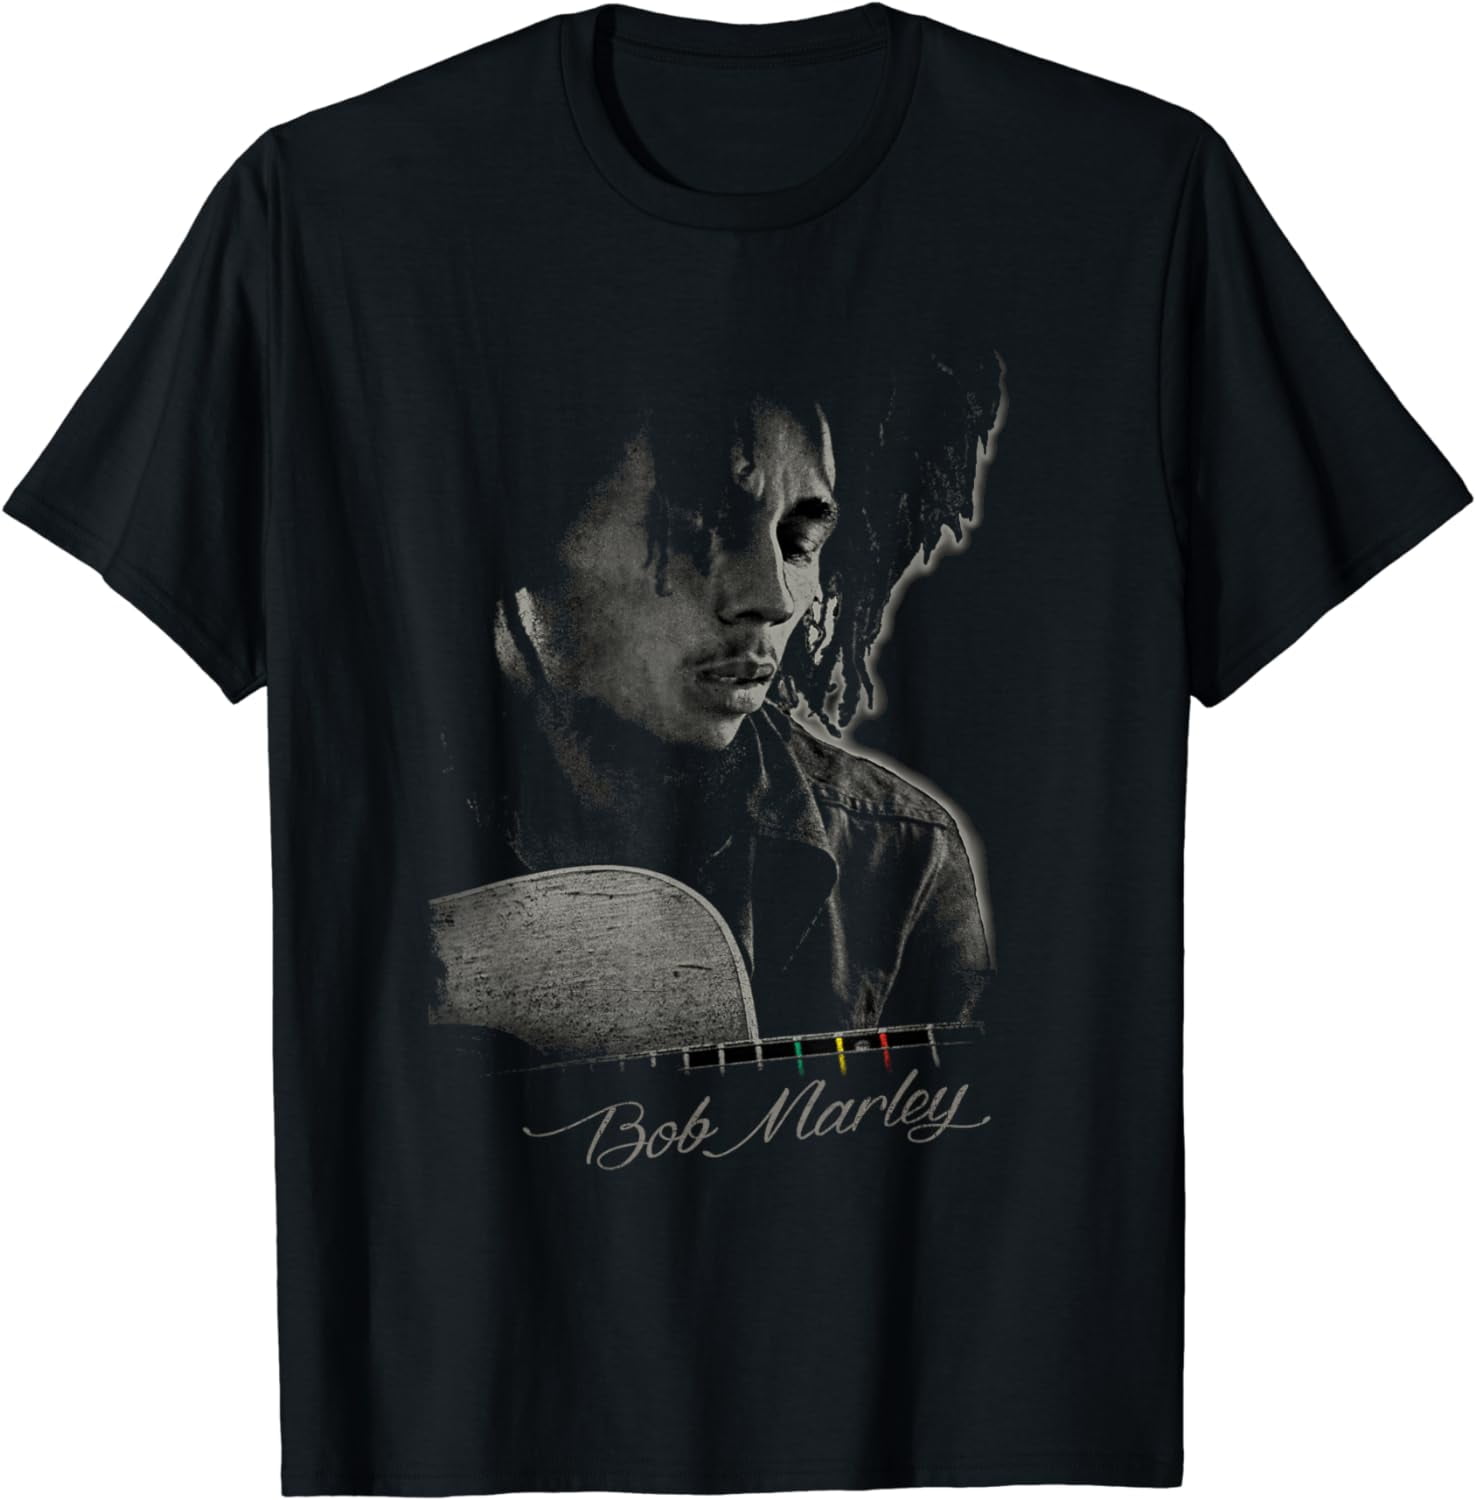 Bob Marley Catch A Fire Guitar Tee T-Shirt Graphic For Men And Women ...